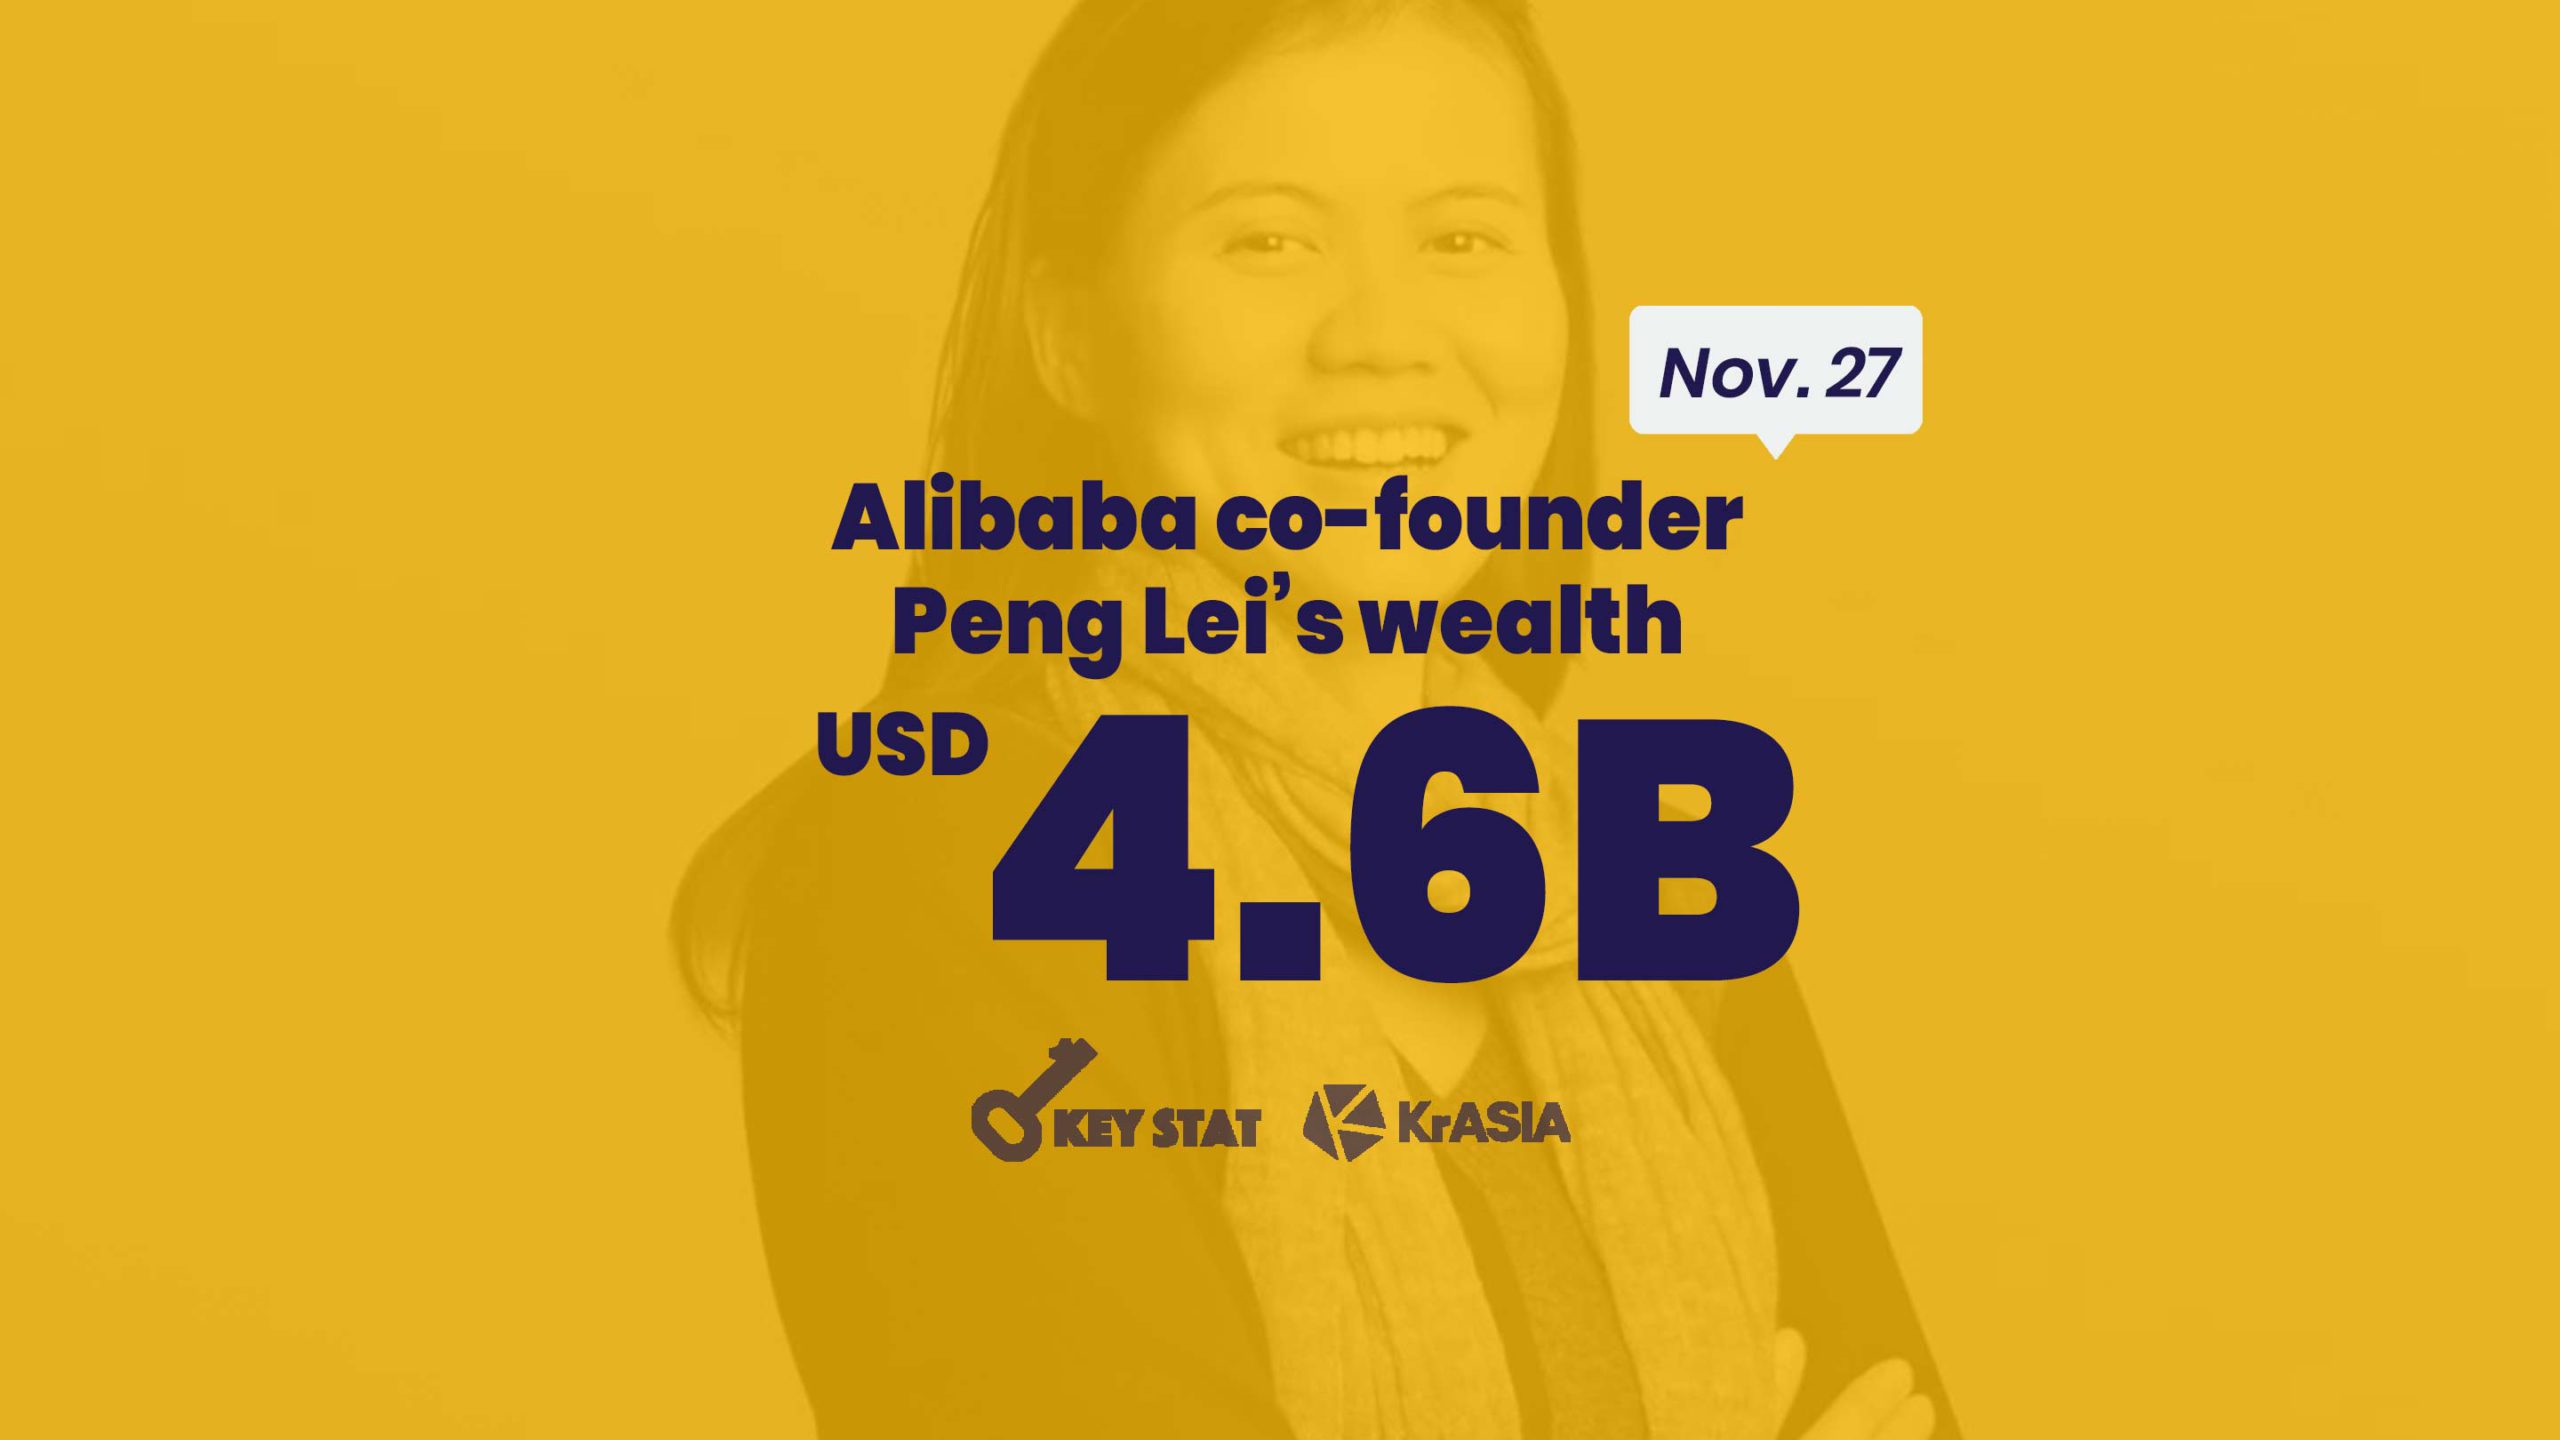 KEY STAT | Alibaba and Ant shareholder Lucy Peng is back on the list of China’s richest female entrepreneurs